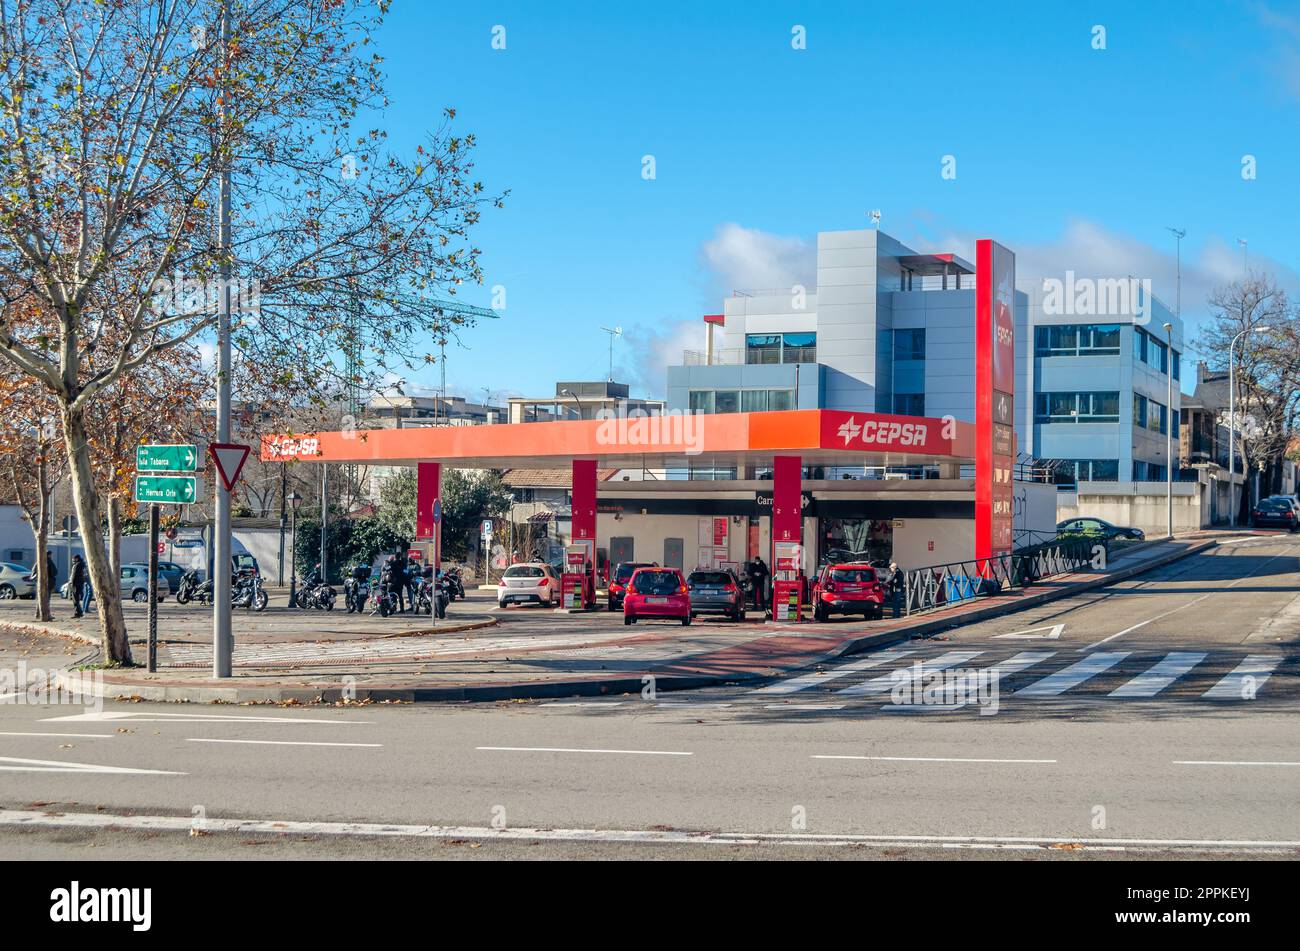 MADRID, SPAIN - DECEMBER 27, 2021: Cepsa gas station in Madrid, Spain. Cepsa is a Spanish multinational oil and gas company Stock Photo